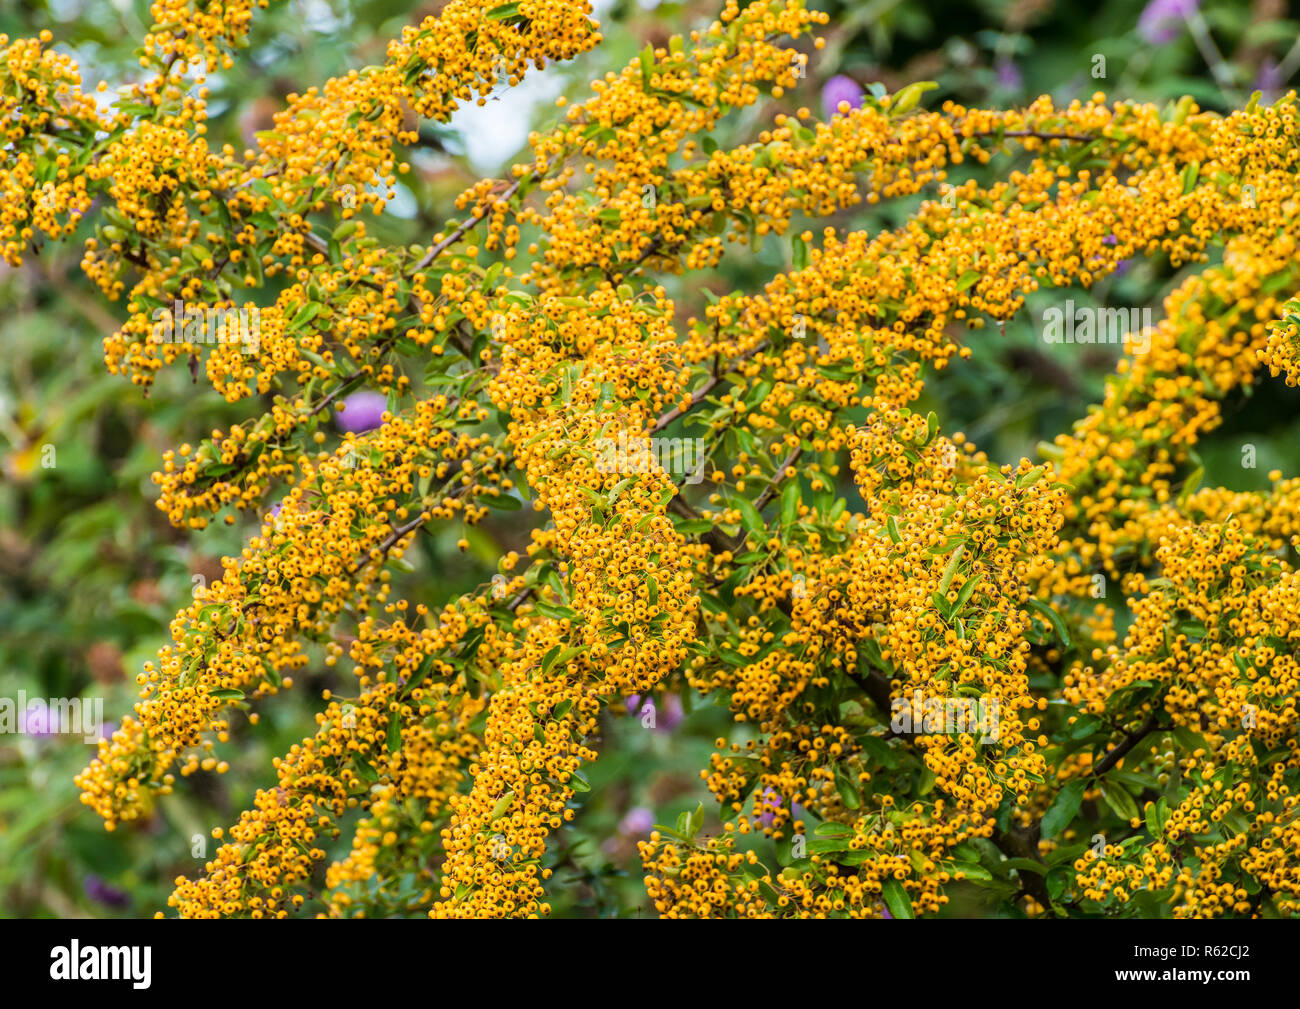 A shot of a mass of yellow berries growing on a pyracantha bush. Stock Photo